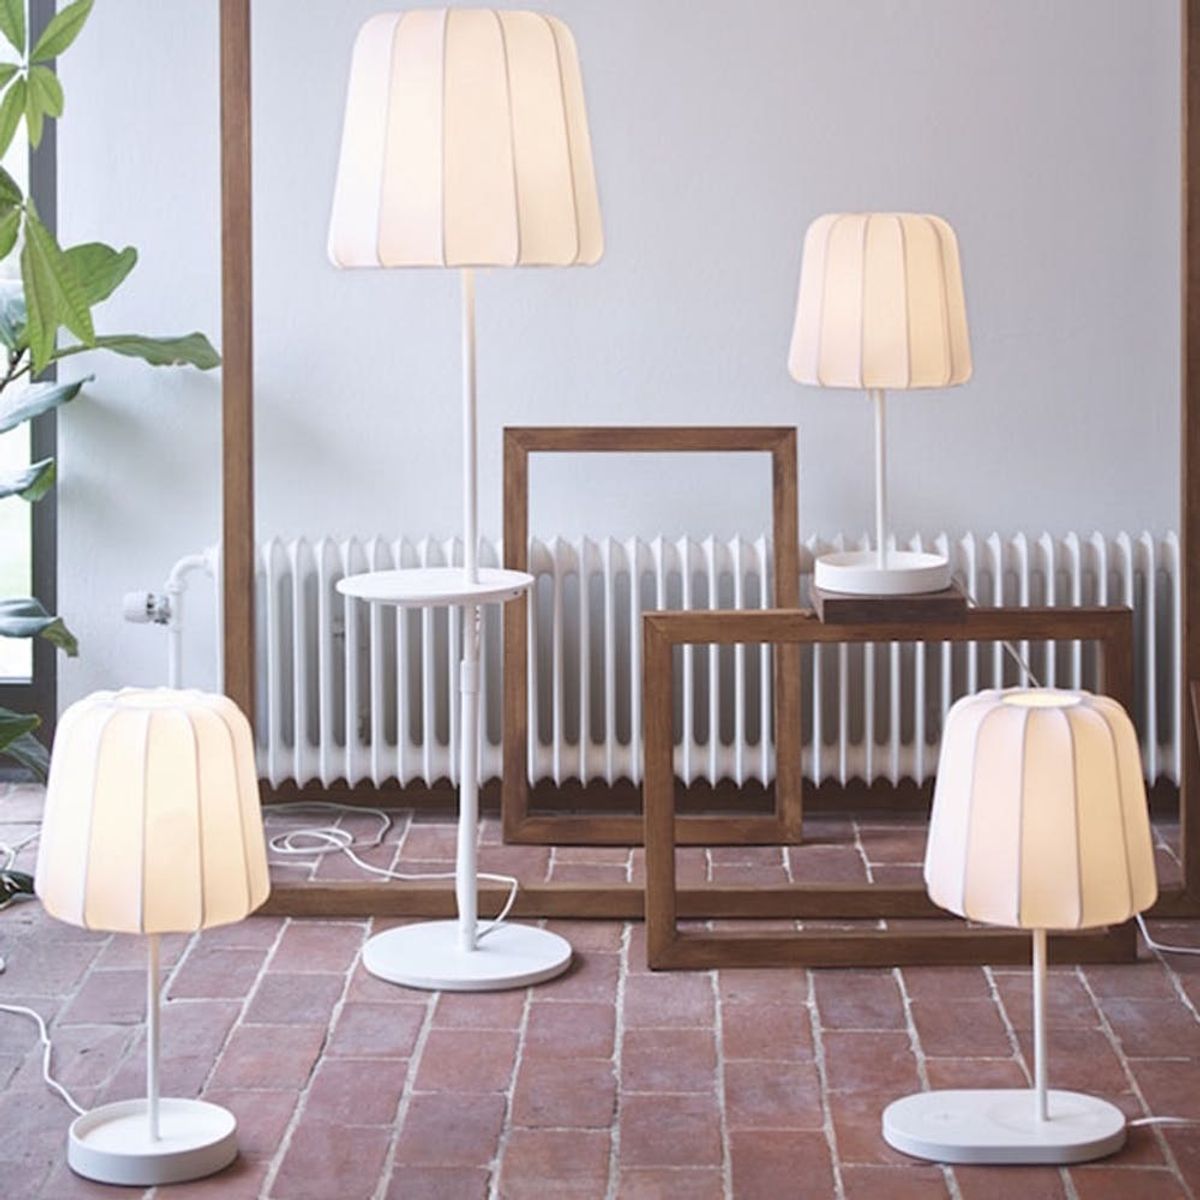 IKEA’s New Furniture Will Charge Your Phone